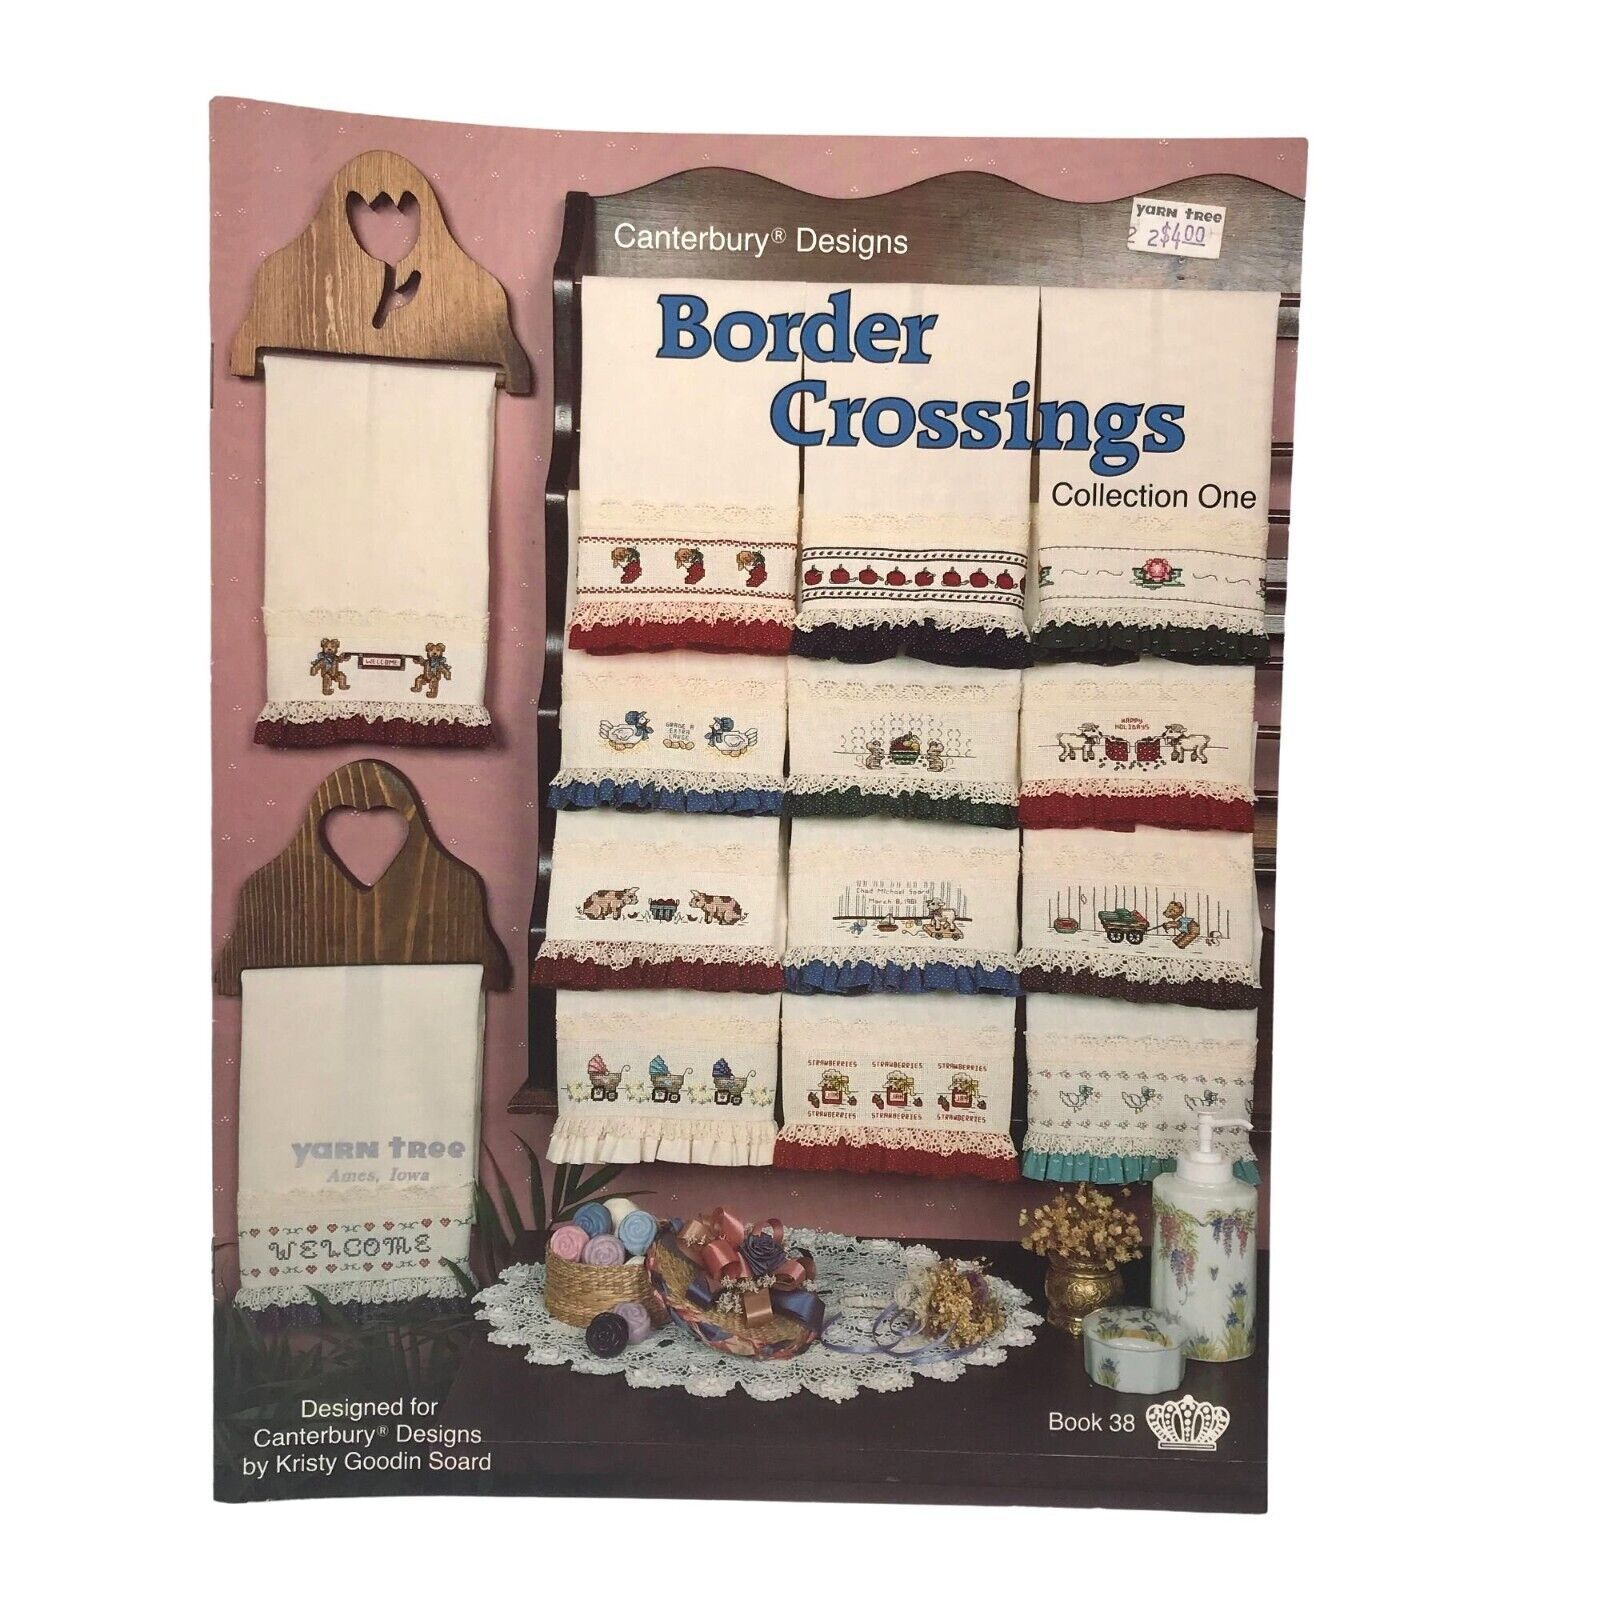 Vintage Cross Stitch Patterns, Border Crossings Collection One by Kristy Goodin - $7.85